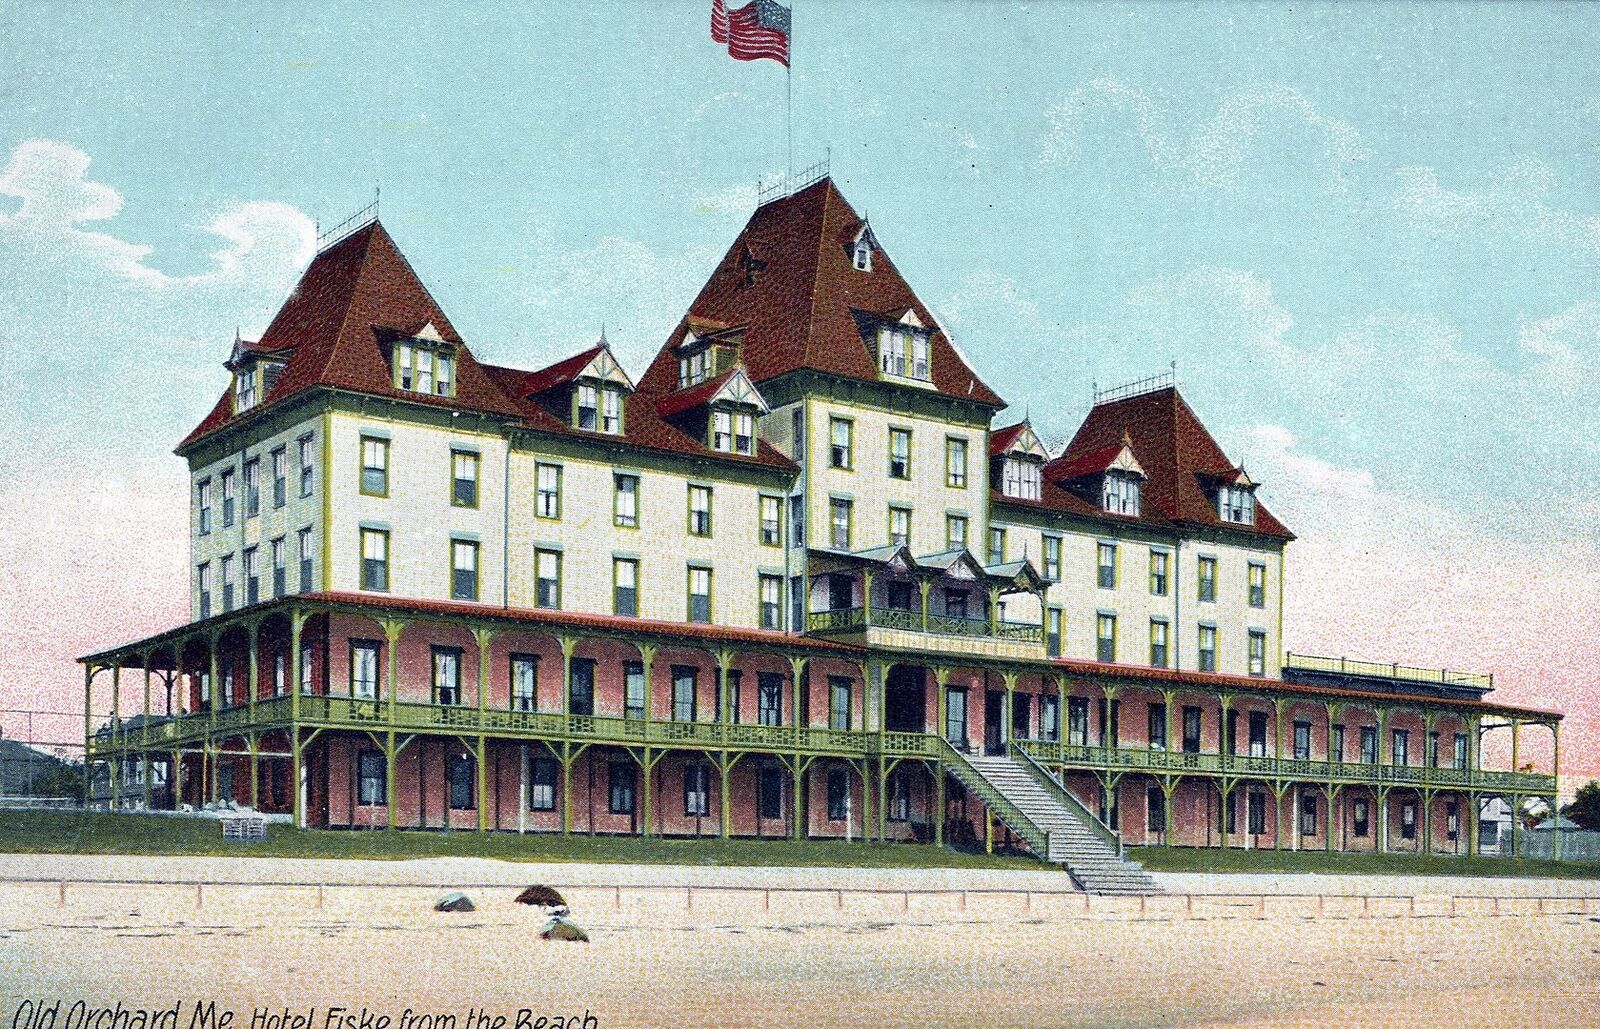 OLD ORCHARD ME - Hotel Fiske From The Beach Postcard